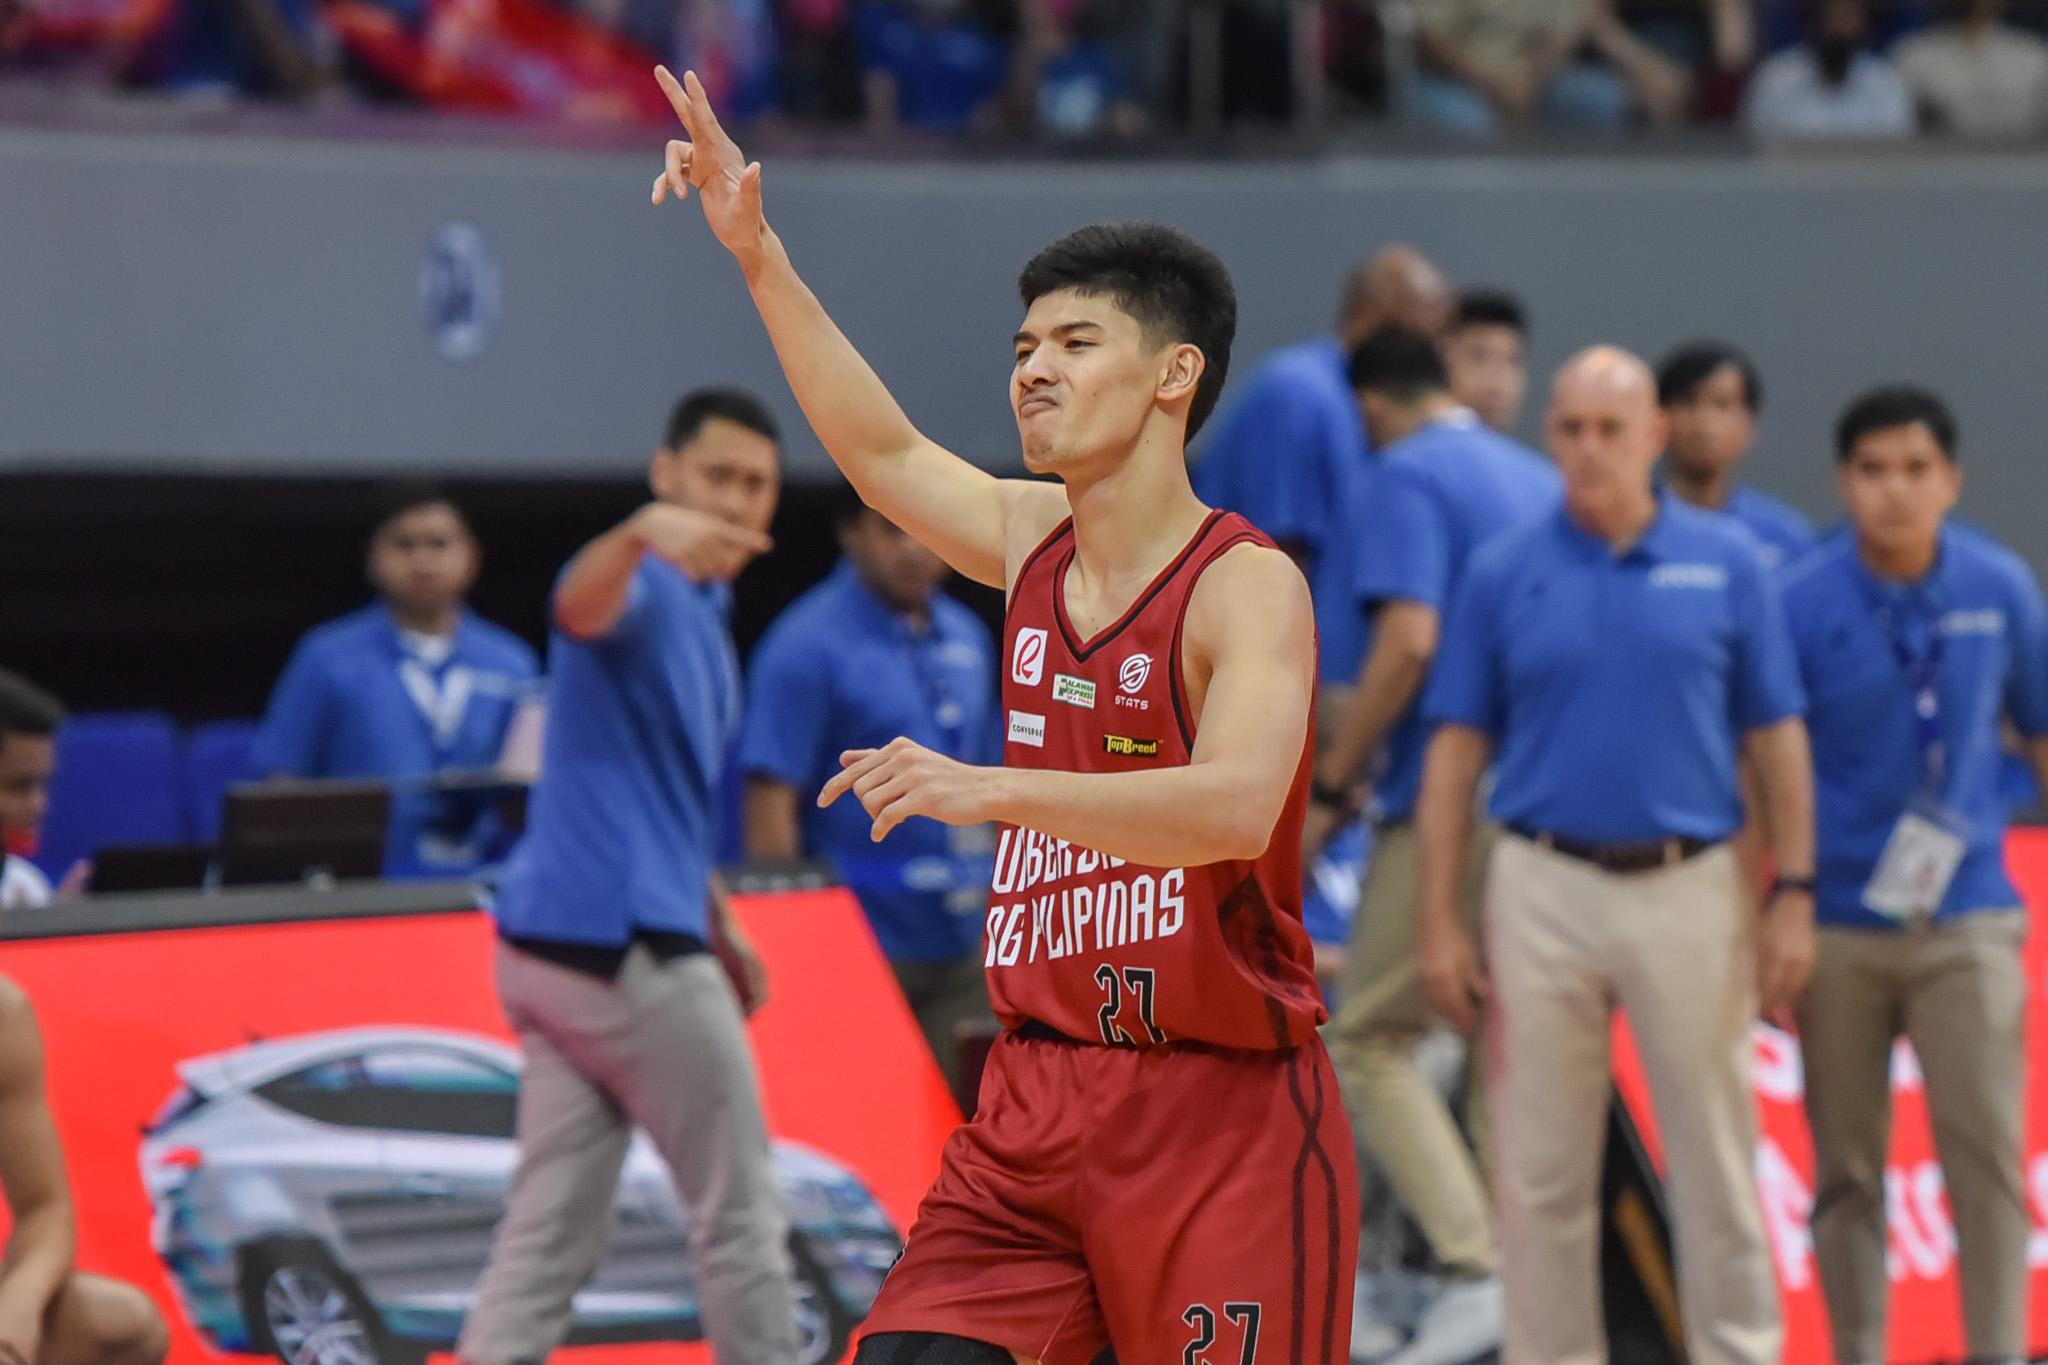 UAAP-84-MBB-ADMU-vs.-UP-Finals-G3-CJ-Cansino-3667 CJ Cansino lays it all on the line during inspirational Finals appearance Basketball News UAAP UP  - philippine sports news